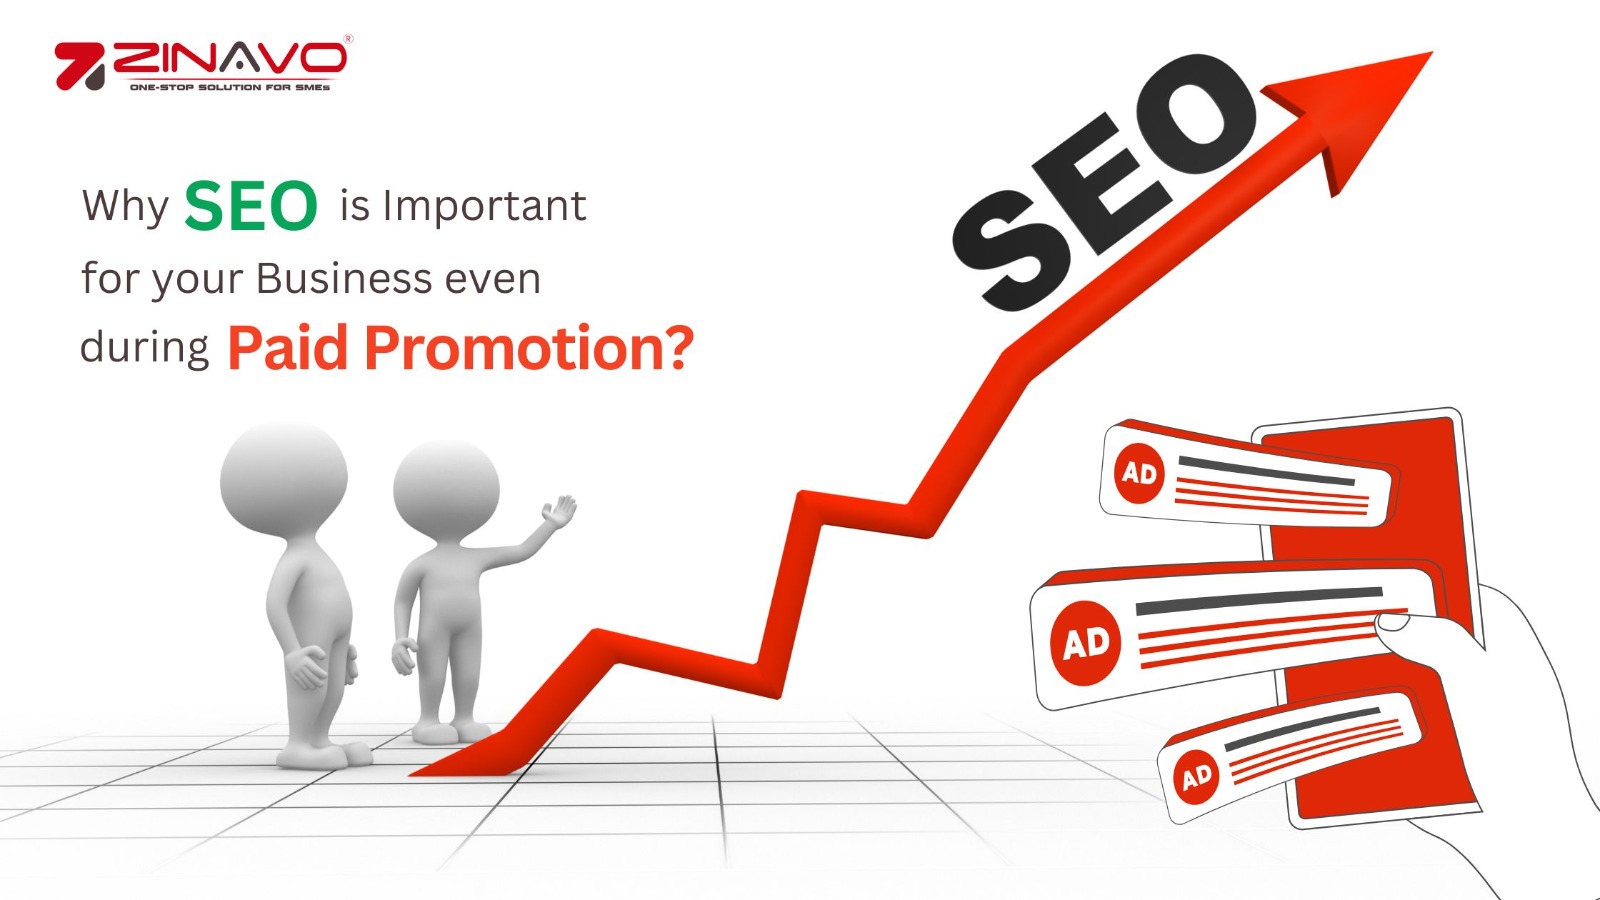 Why SEO is Important for your Business even during Paid Promotion.